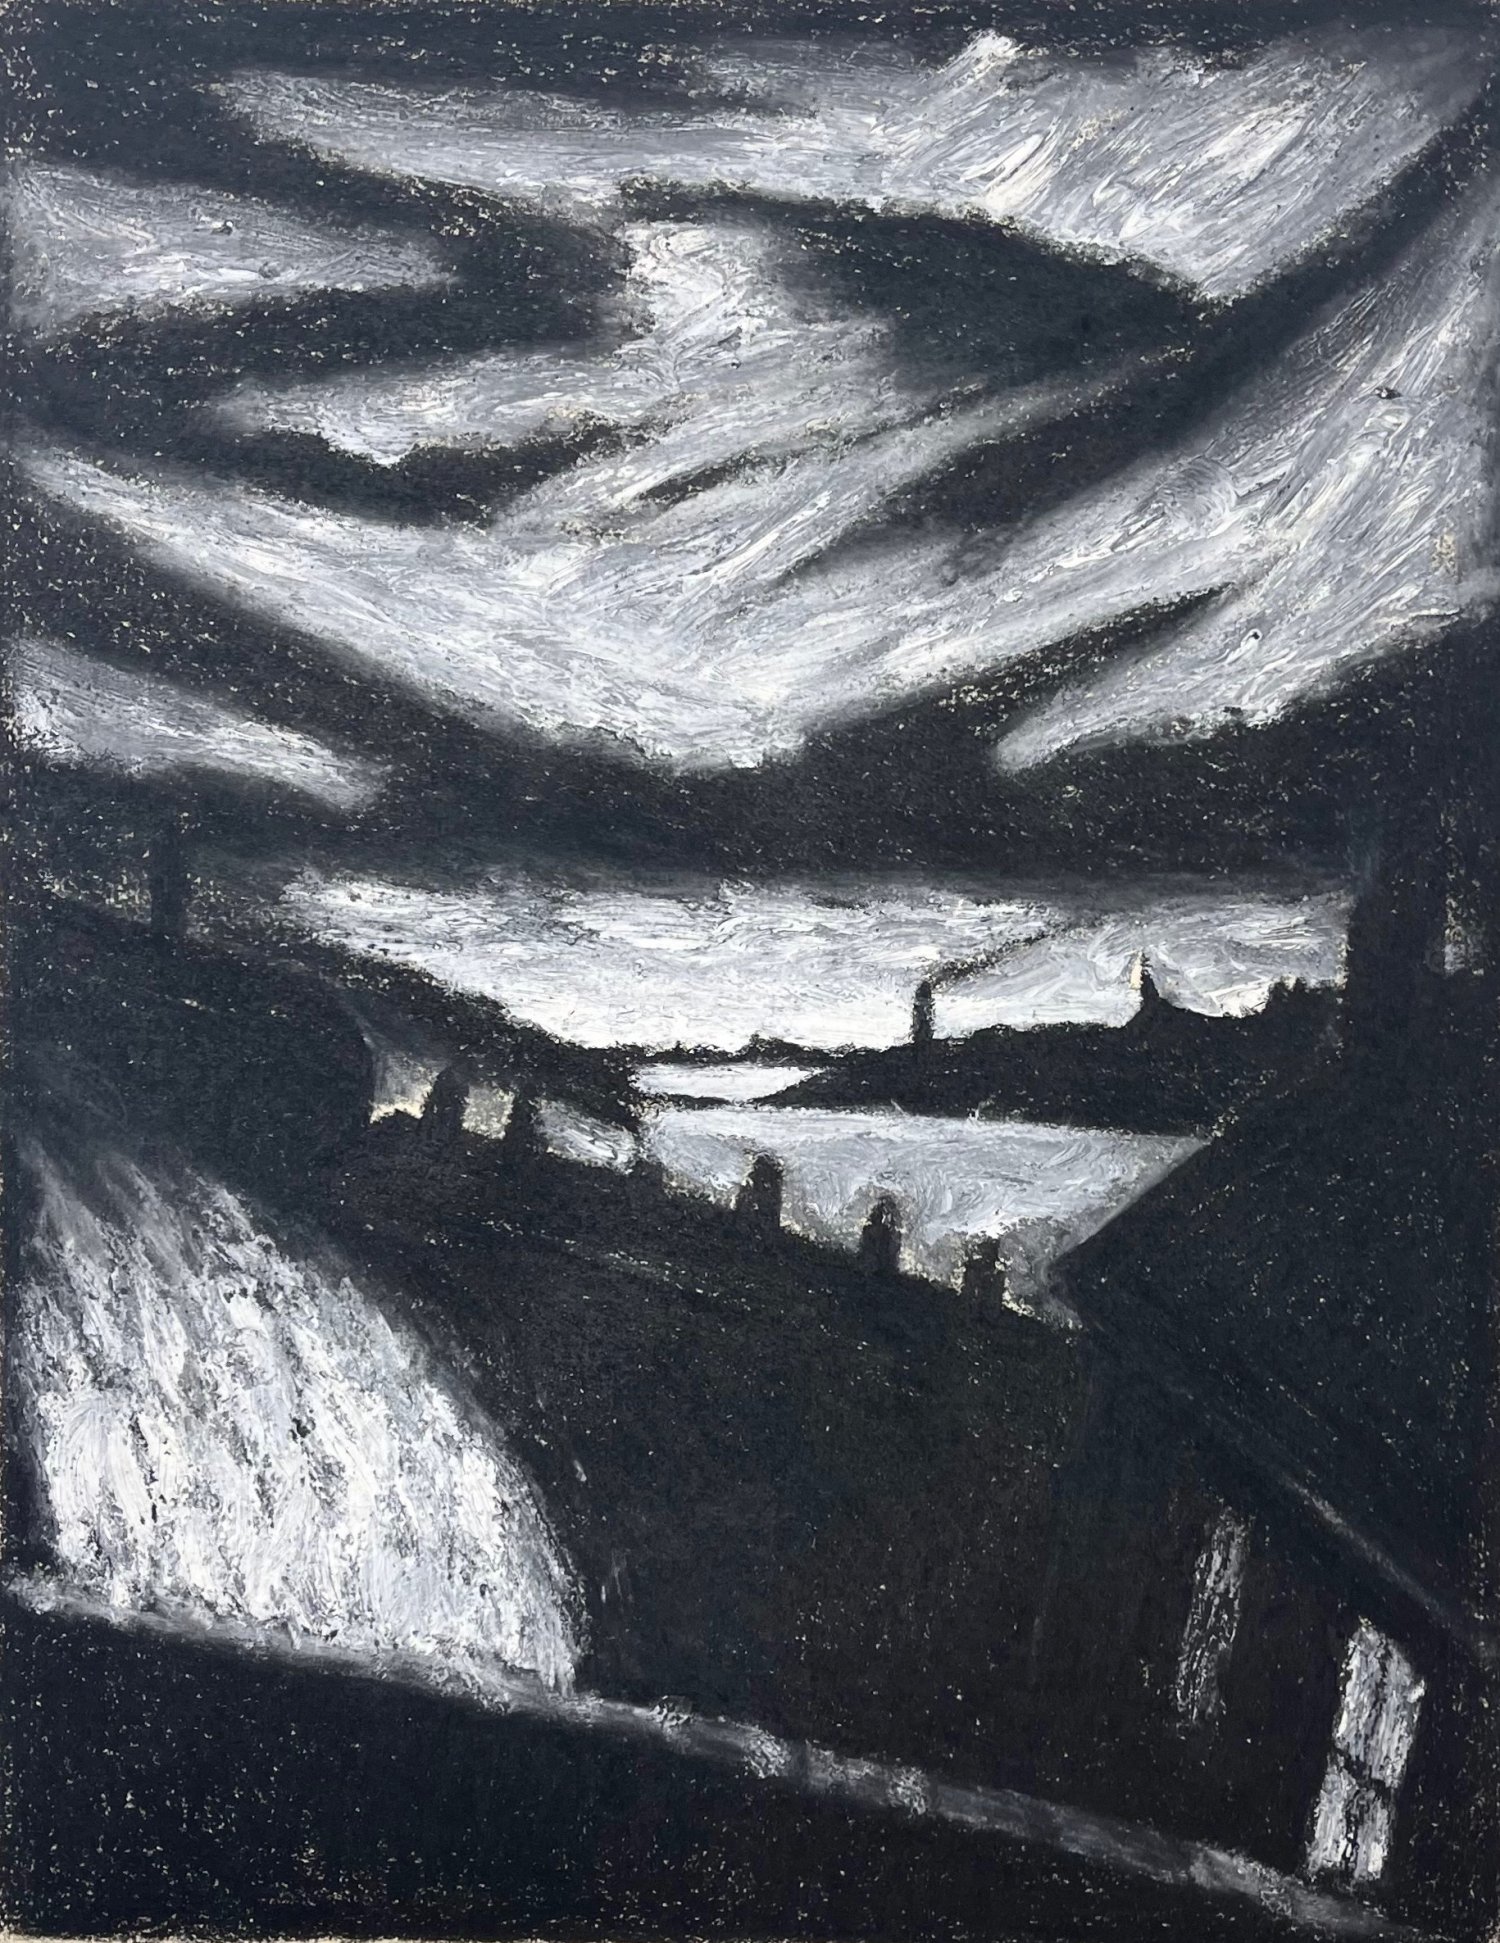 Drawing (also known as Untitled or Gestural Landscape or Night Sky)